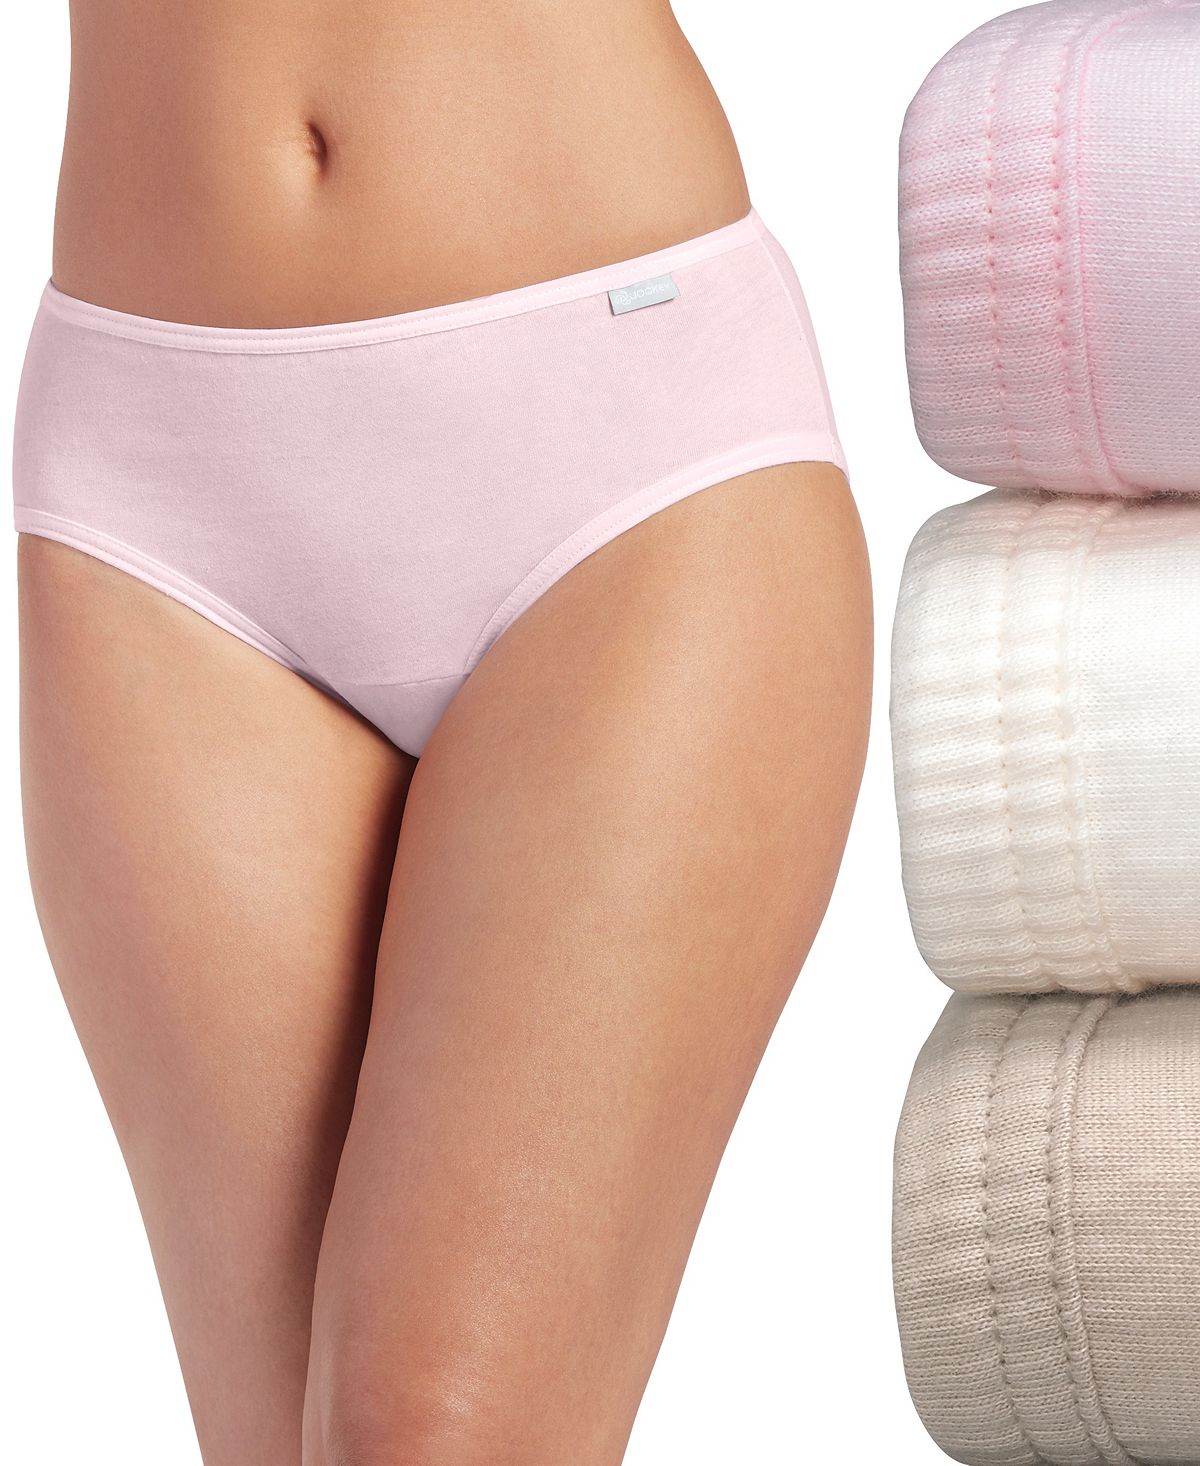 Jockey Elance Hipster Underwear 3 Pack 1482 1488 Also Available In